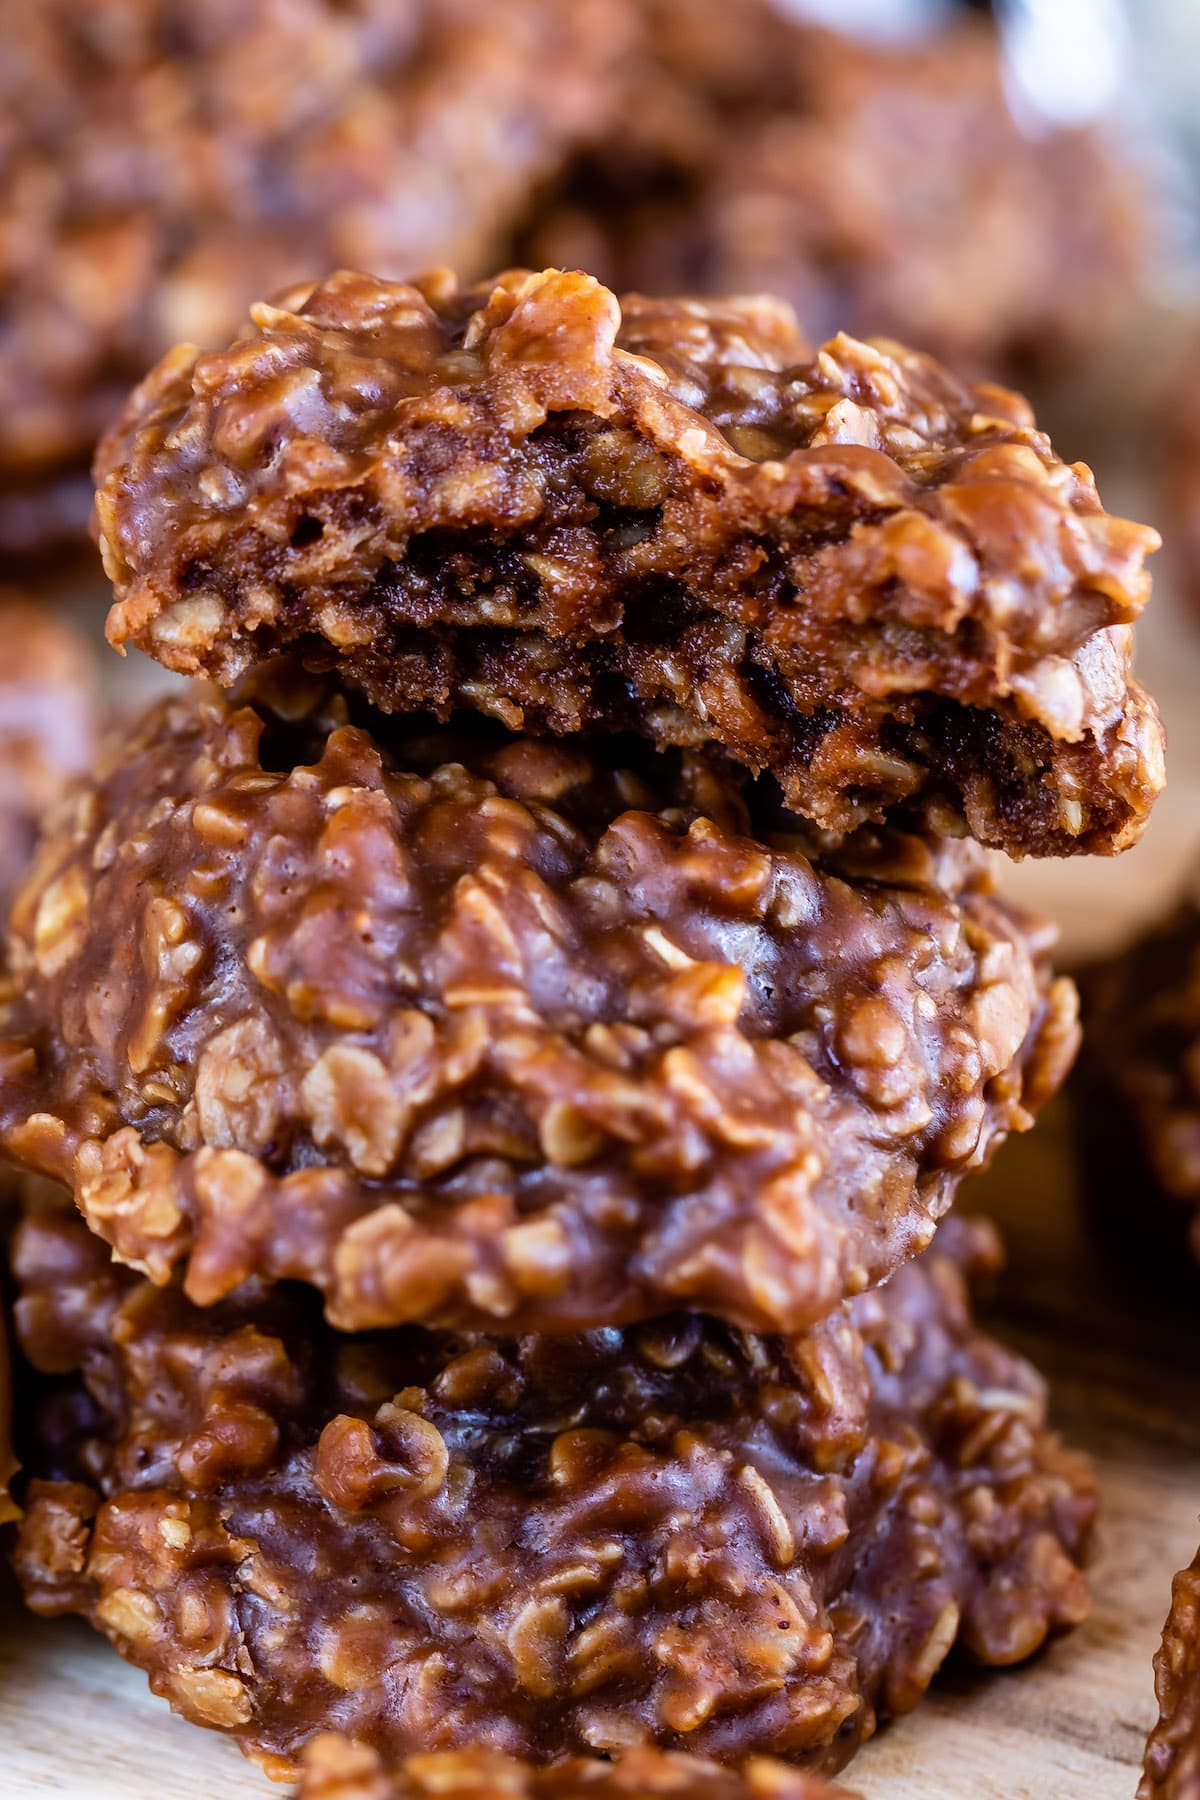 stacked chocolate cookies with oats in them.